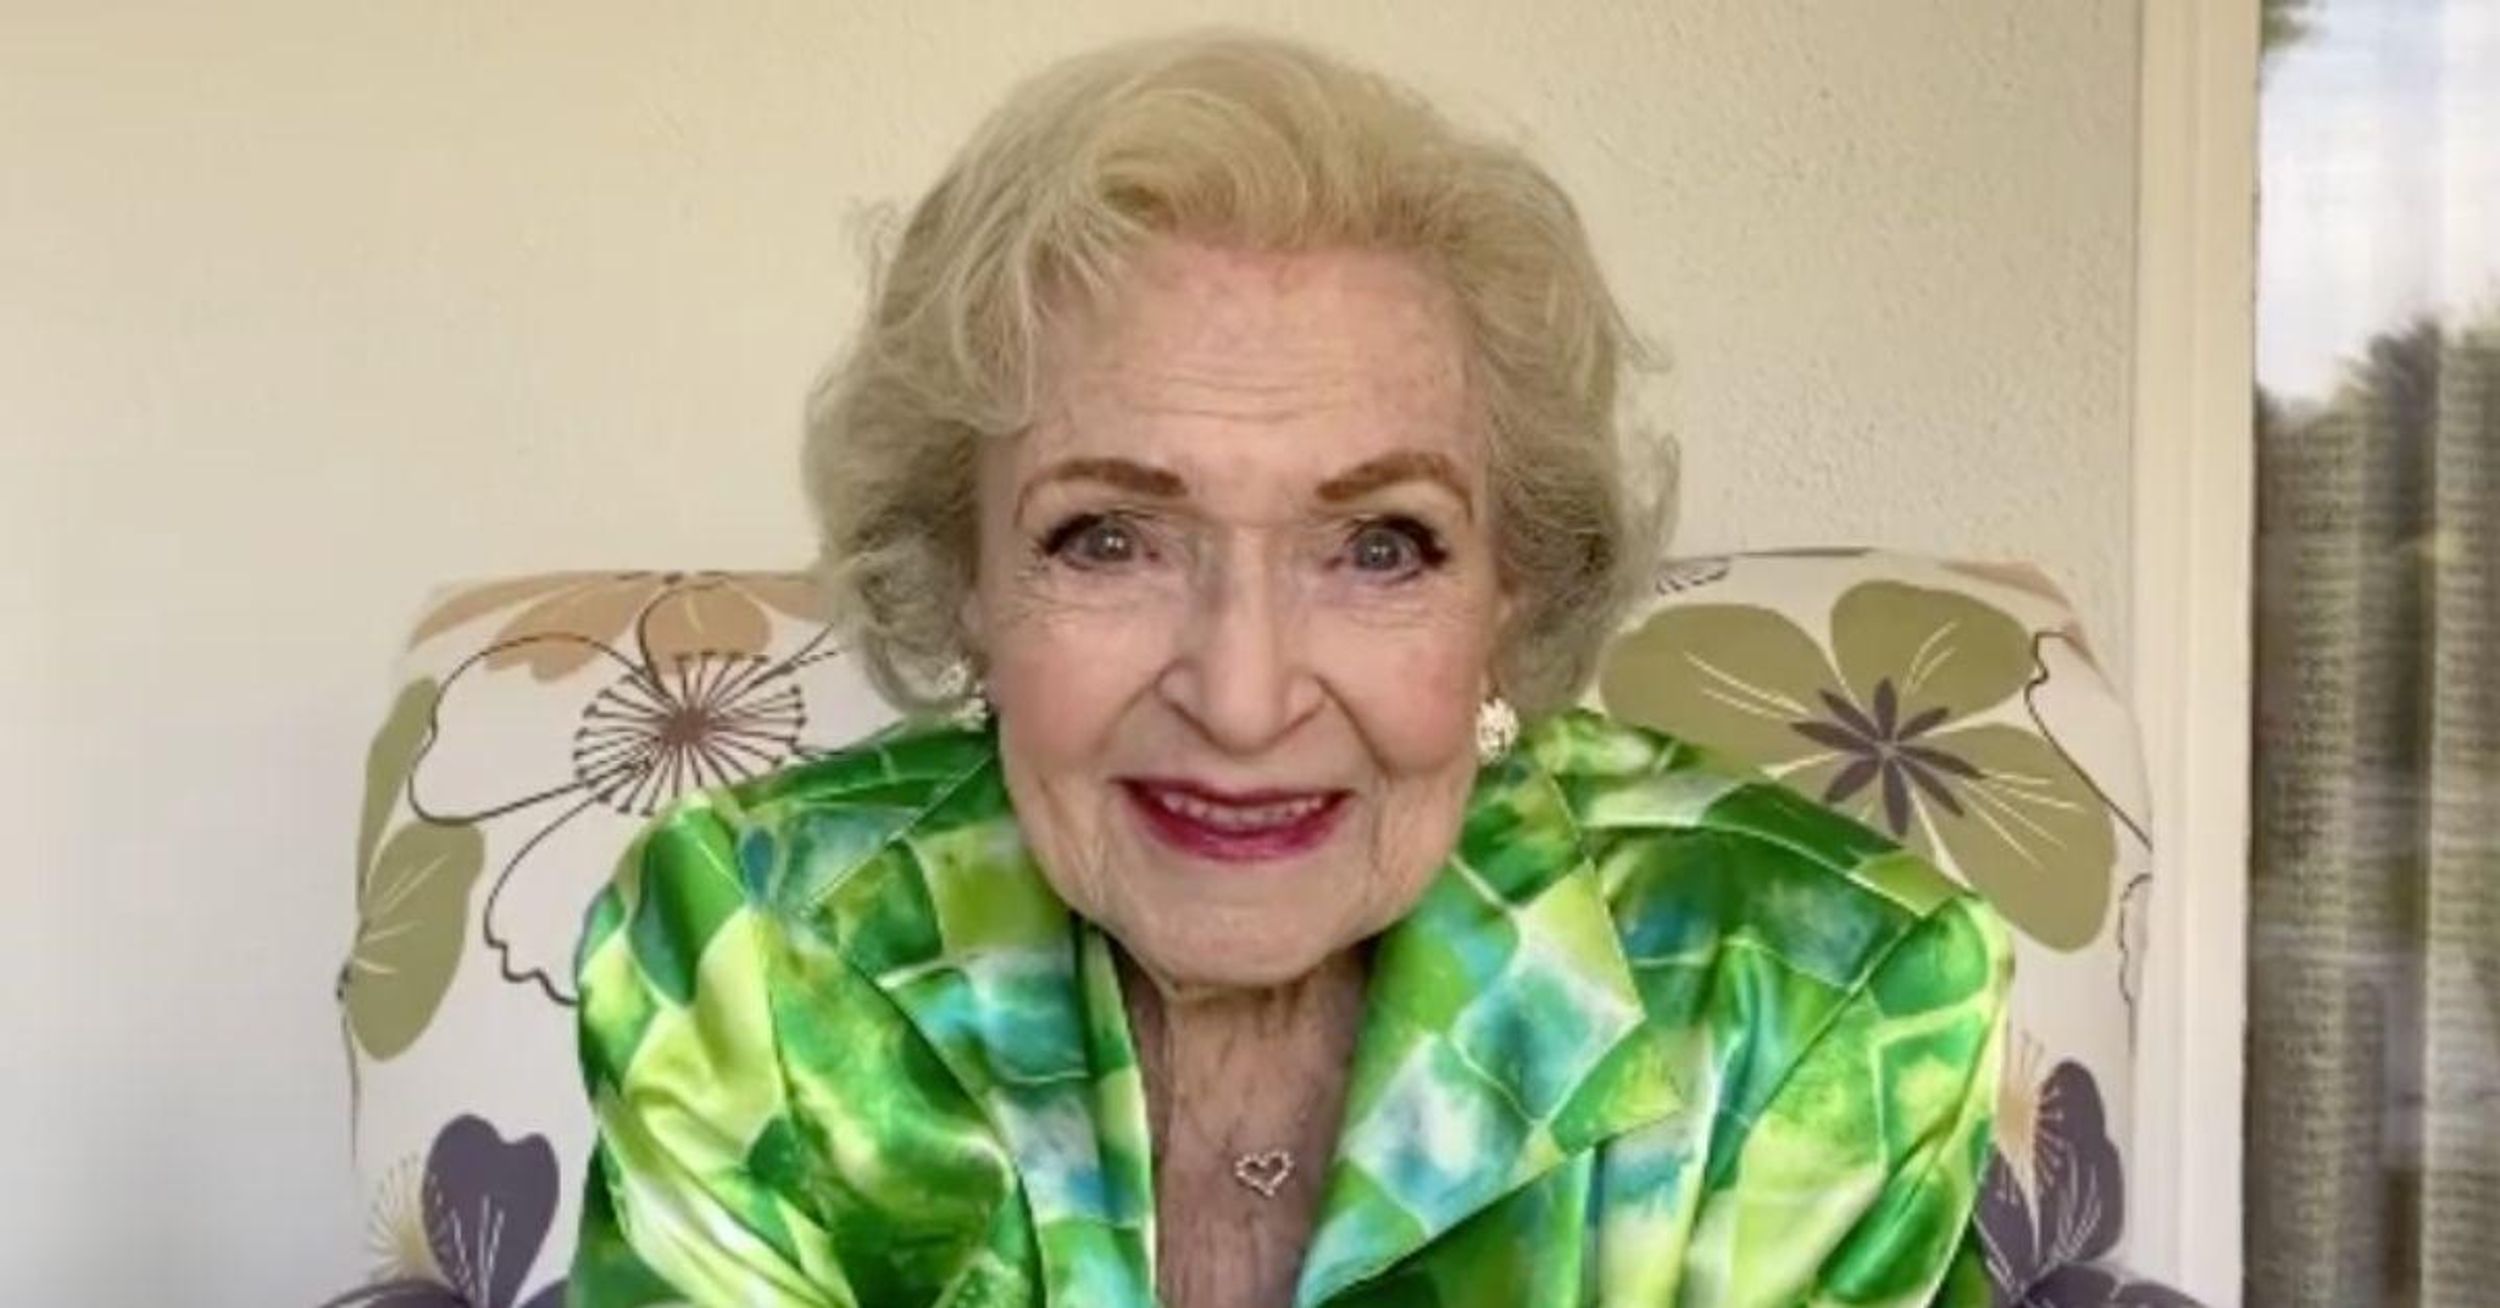 Betty White's Team Shares Birthday Video The Beloved Star Filmed For Fans Days Before Her Death